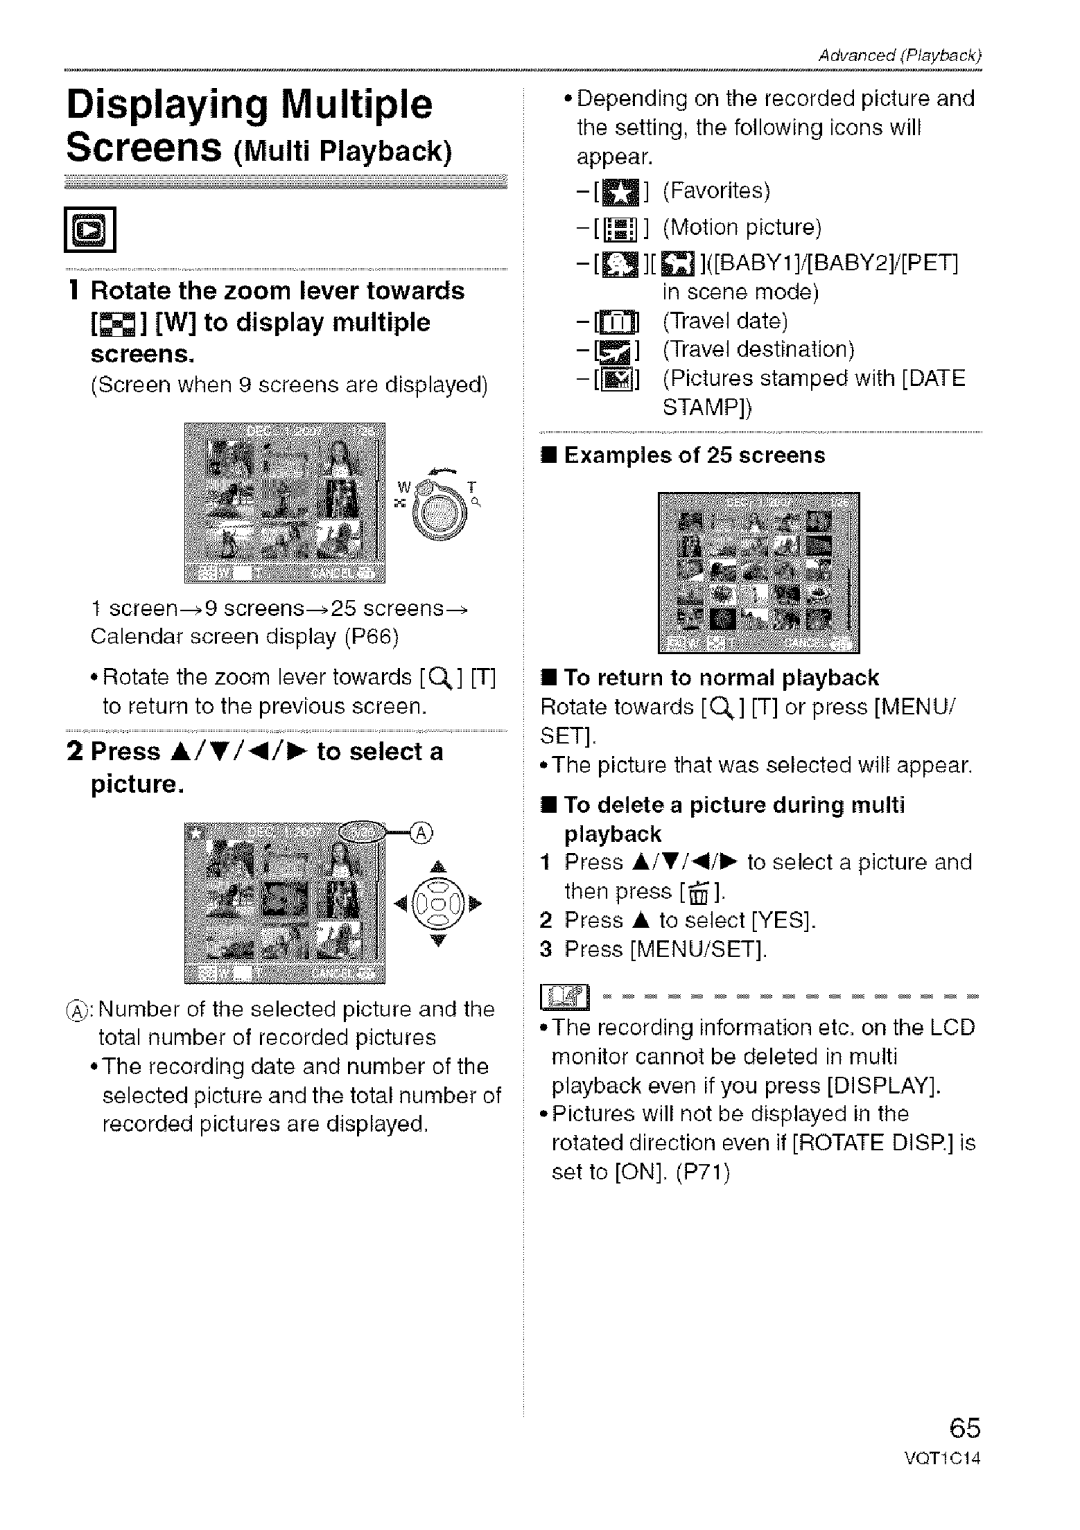 Panasonic DMC-FX10, DMC-FX12 Displaying Multiple, Rotate the zoom lever towards, Screens, Press /I/1/1 to select a Picture 